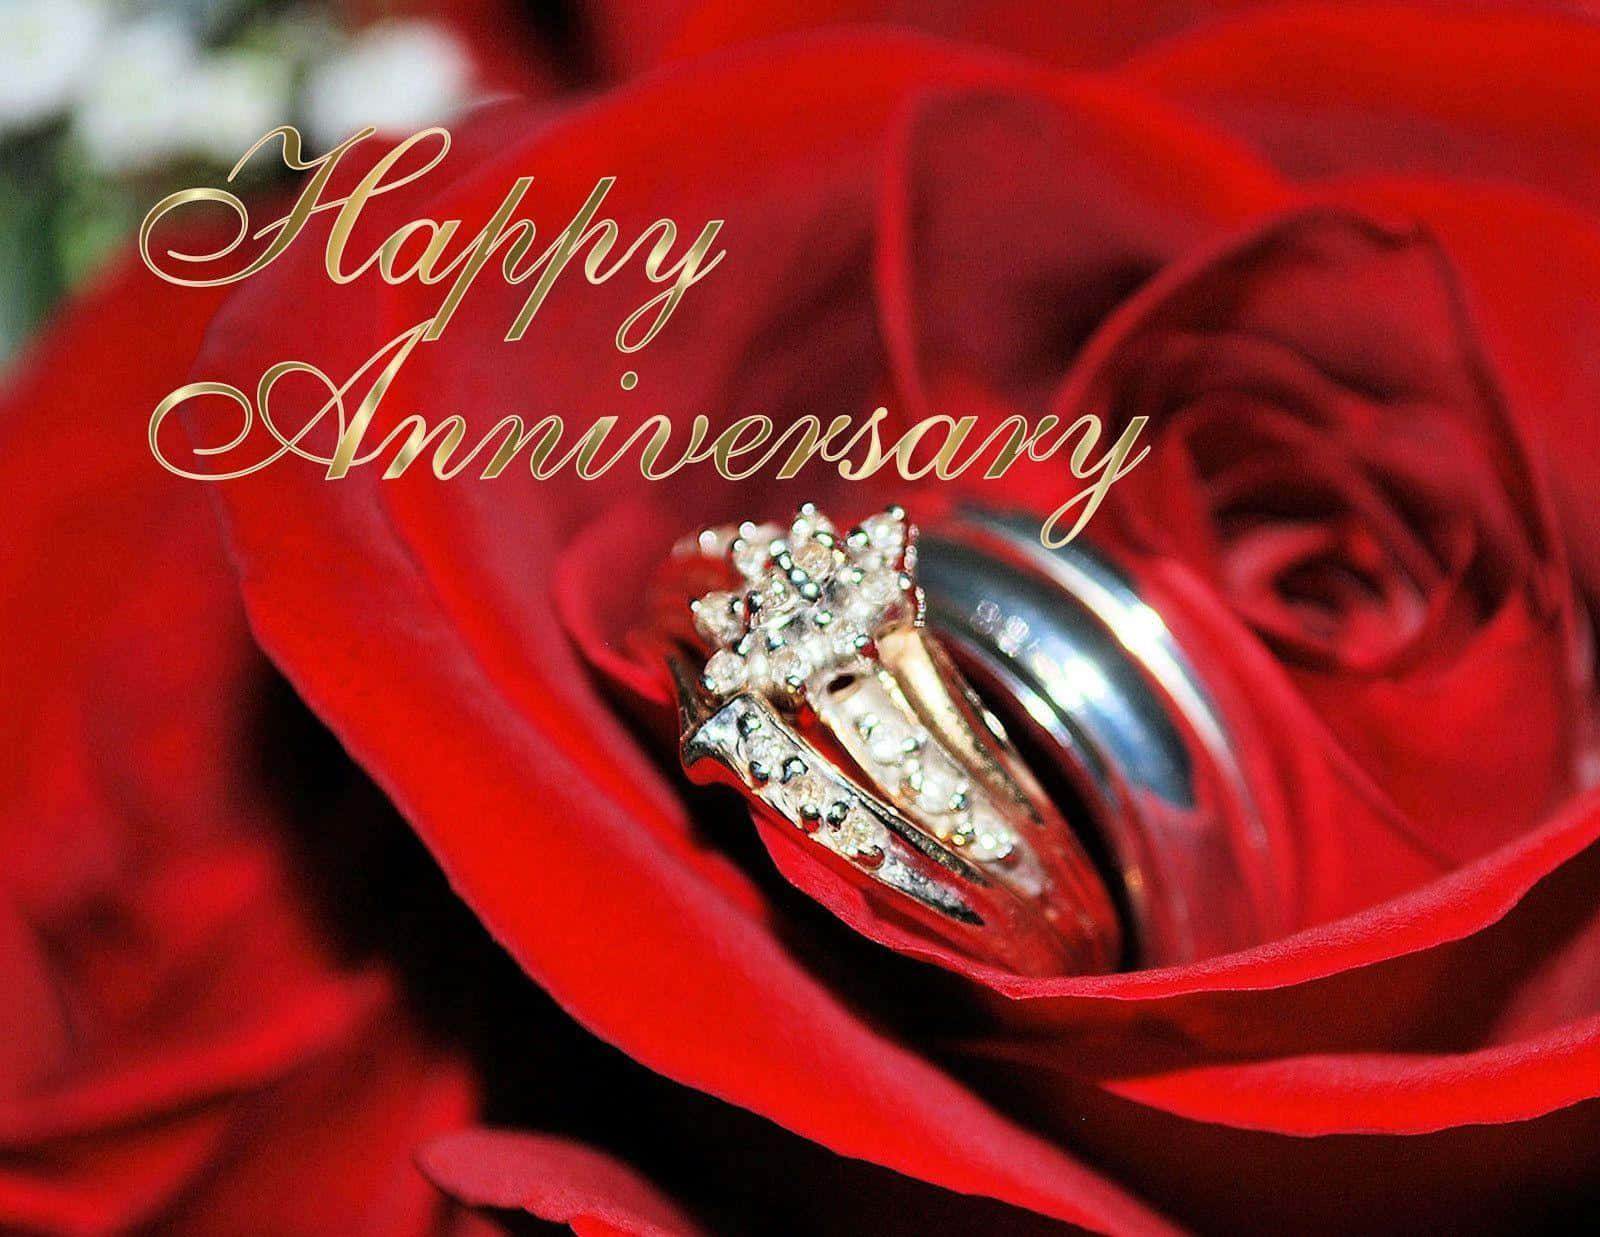 Wishing You a Happy Anniversary Filled With Joy and Laughter